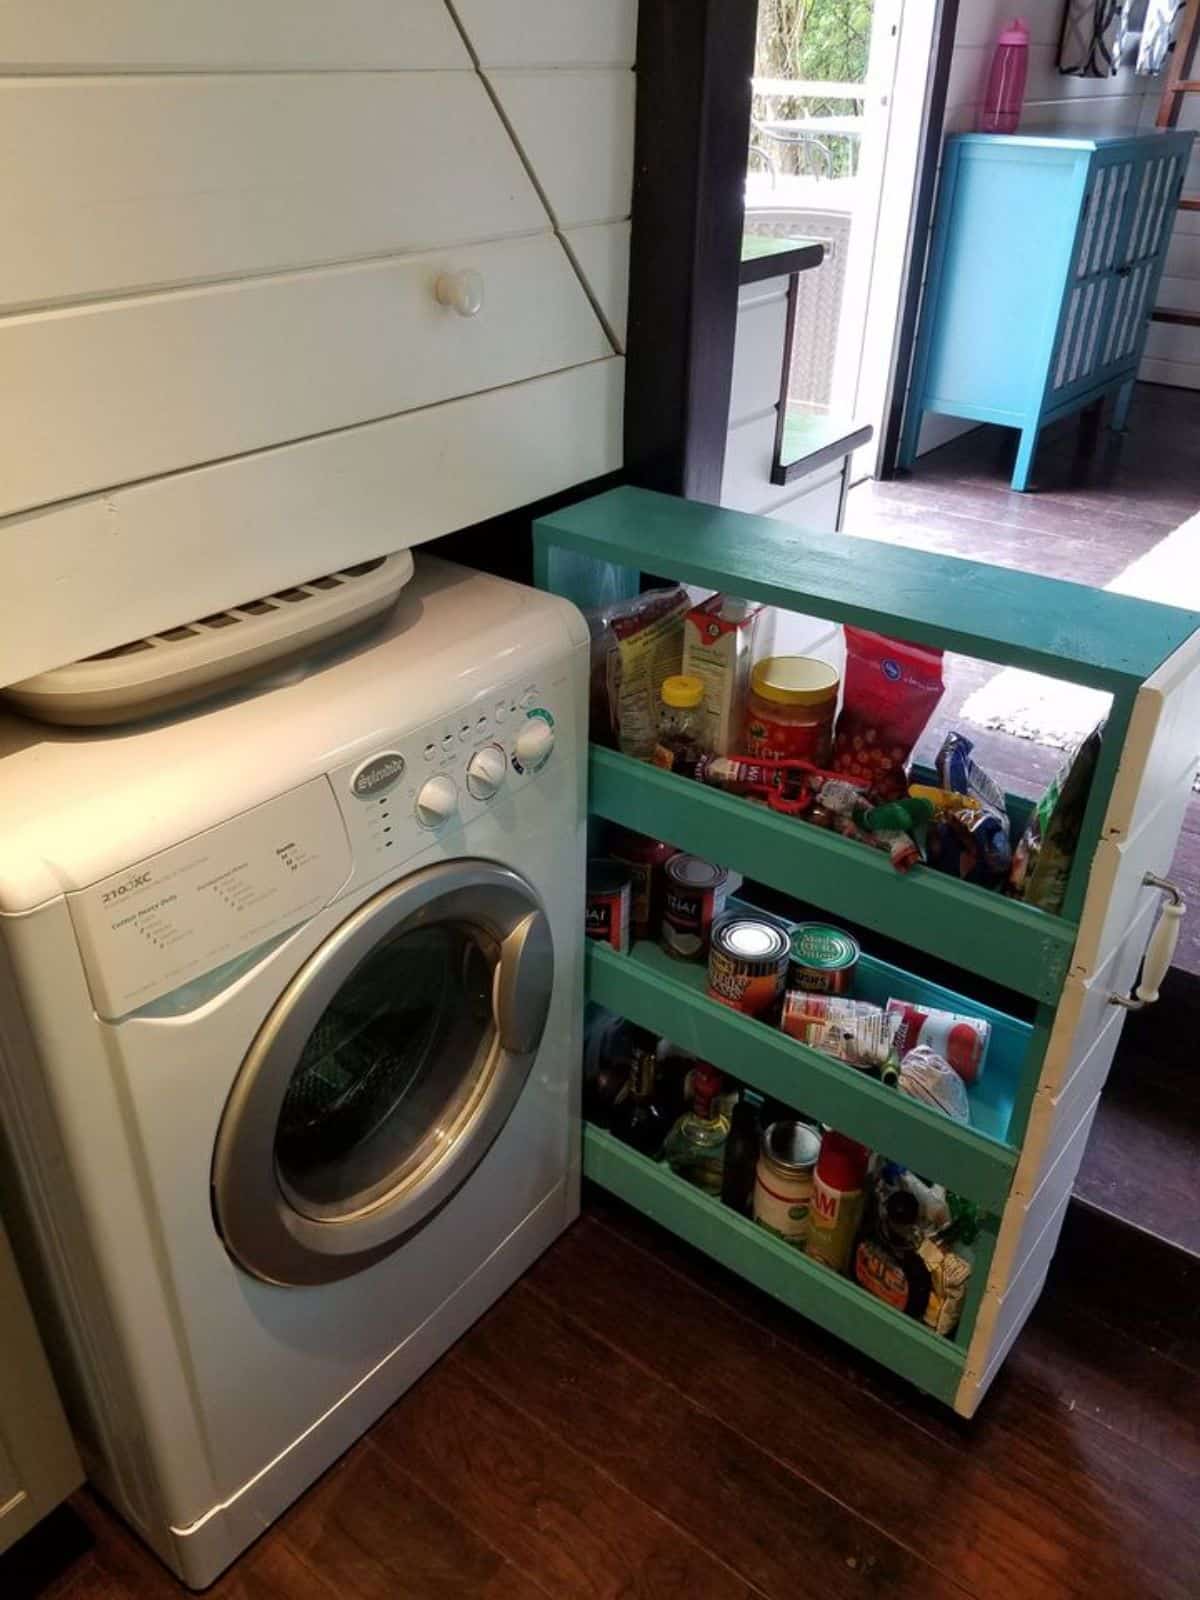 washer dryer combo is also installed in the kitchen area